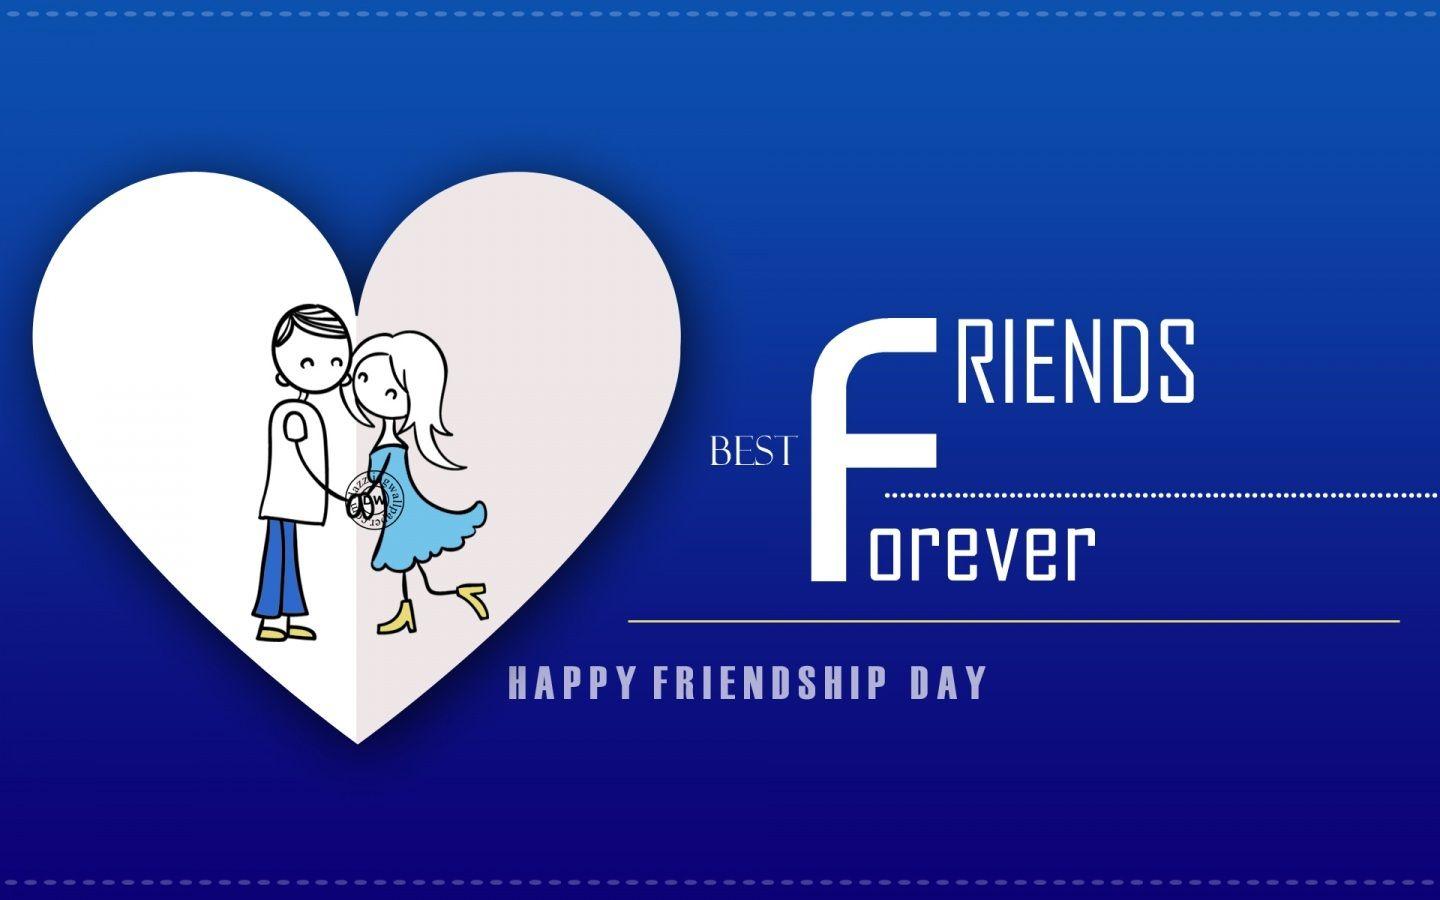 Best friends forever quotes image and friends wallpaper 1920×1076